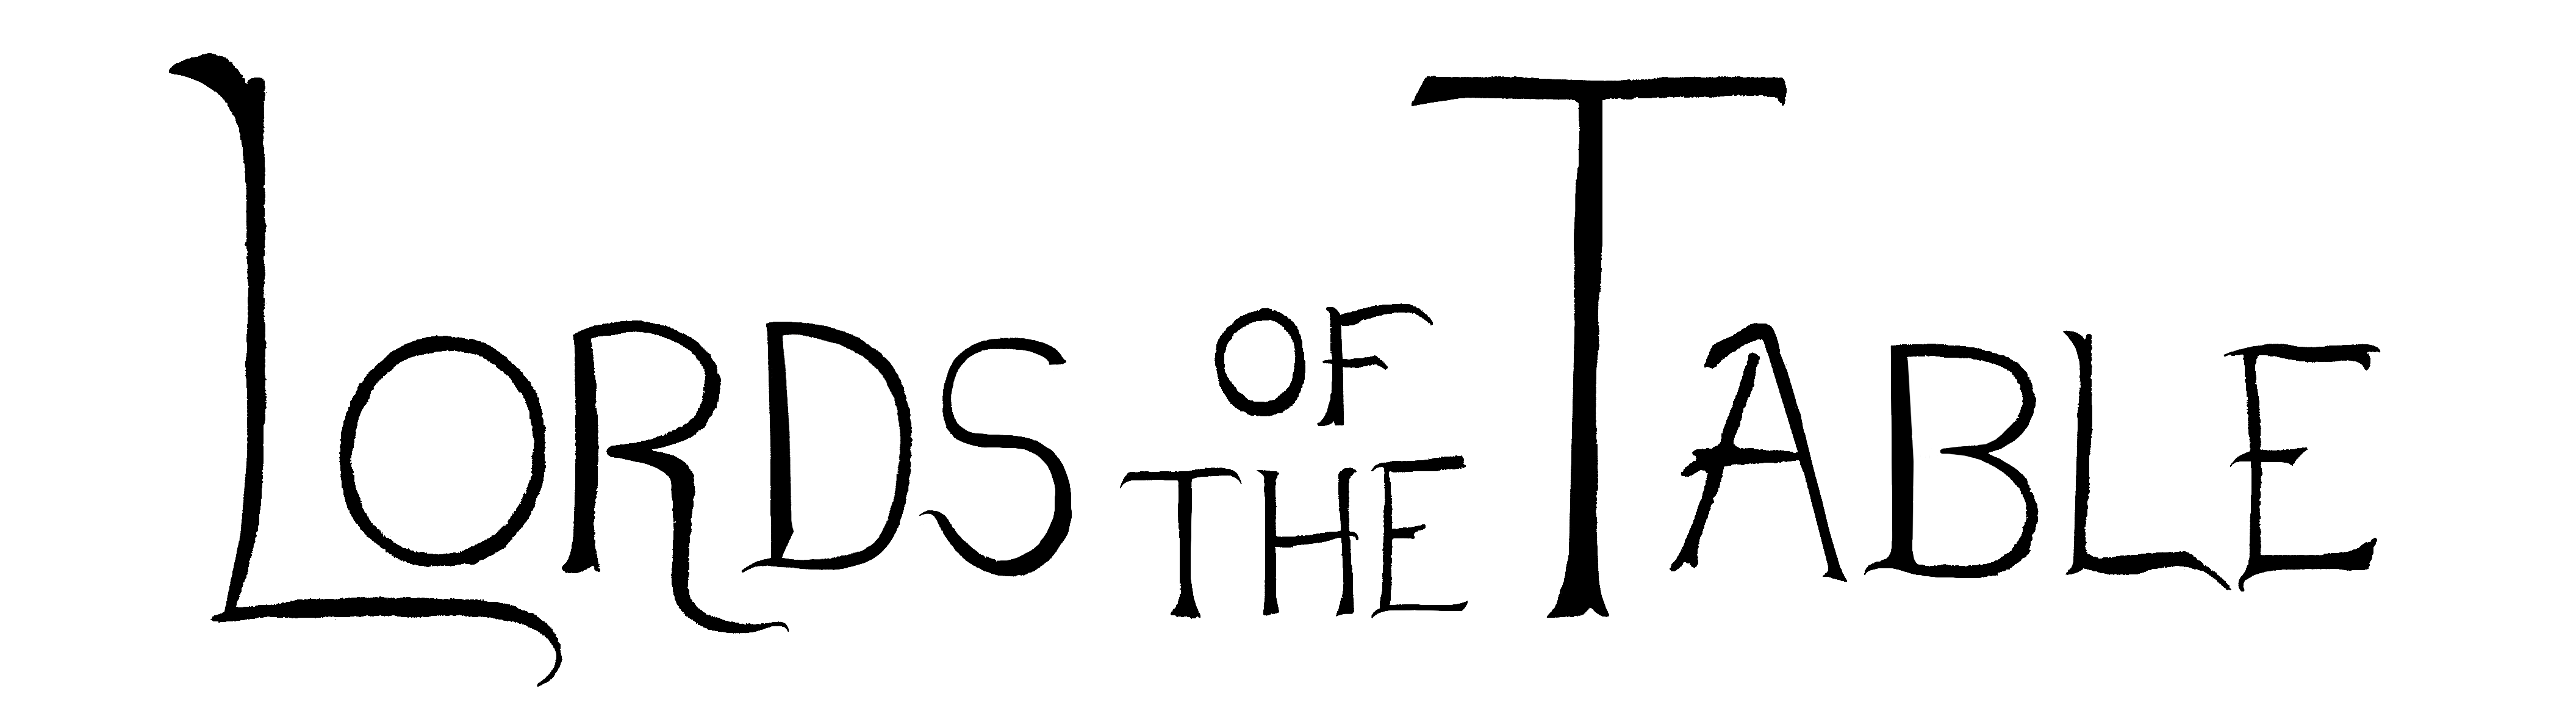 Lords of the Table logo